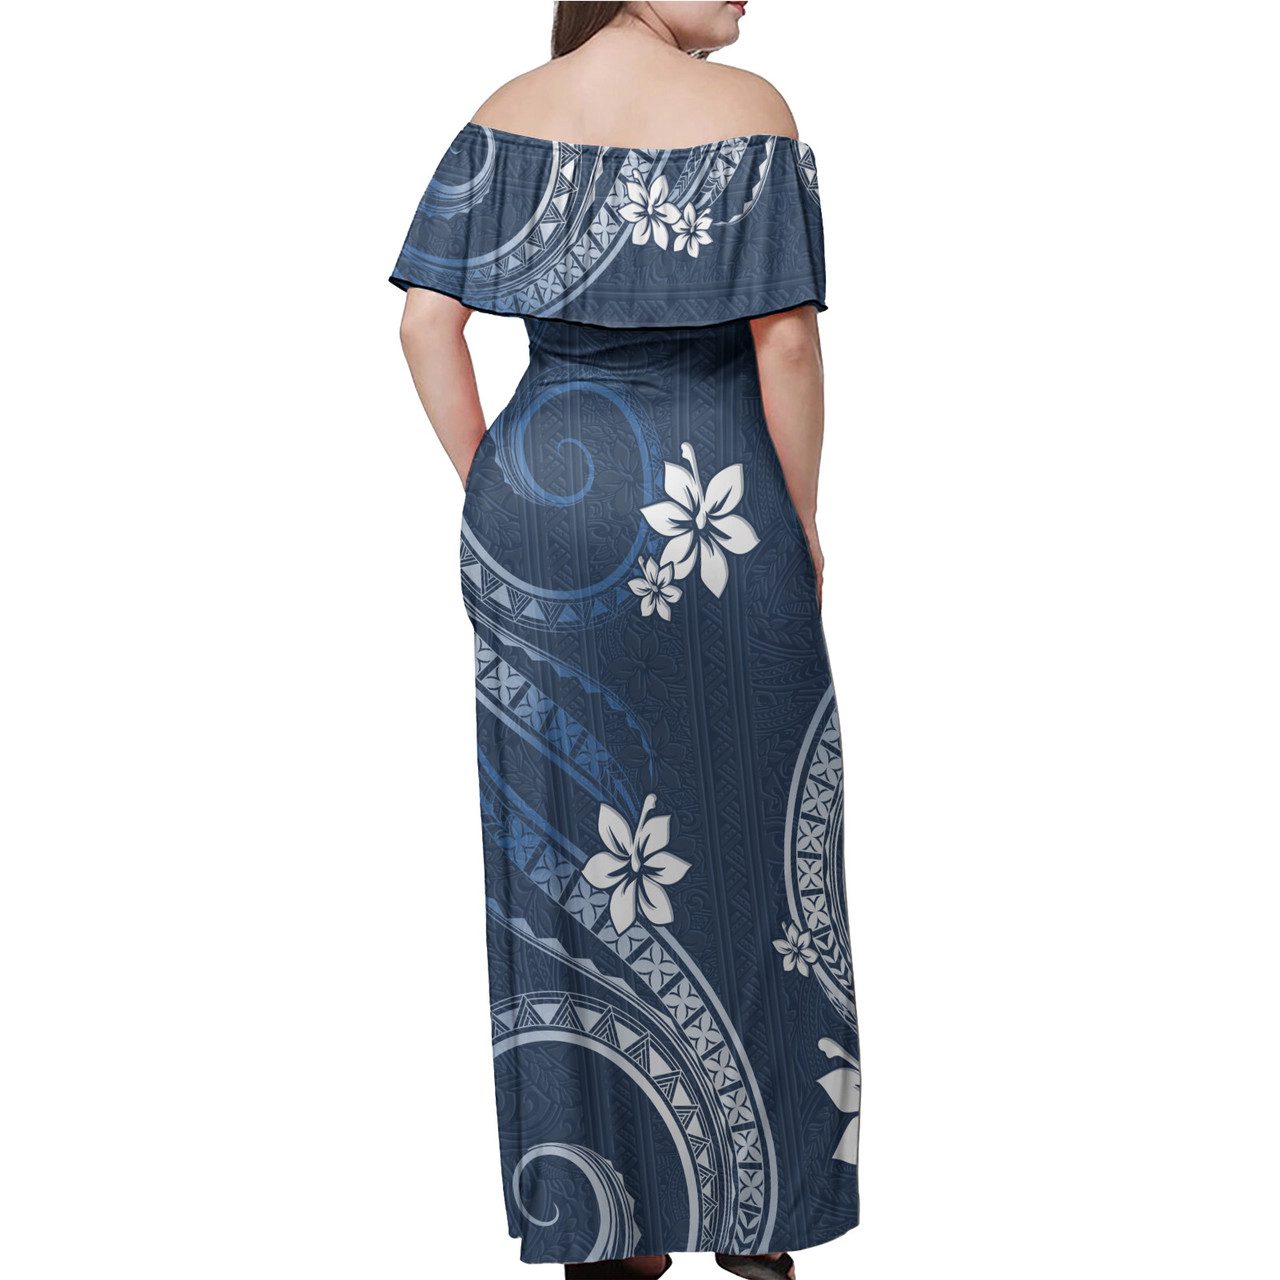 Marshall Islands Off Shoulder Long Dress White Hibiscus Blue Pattern